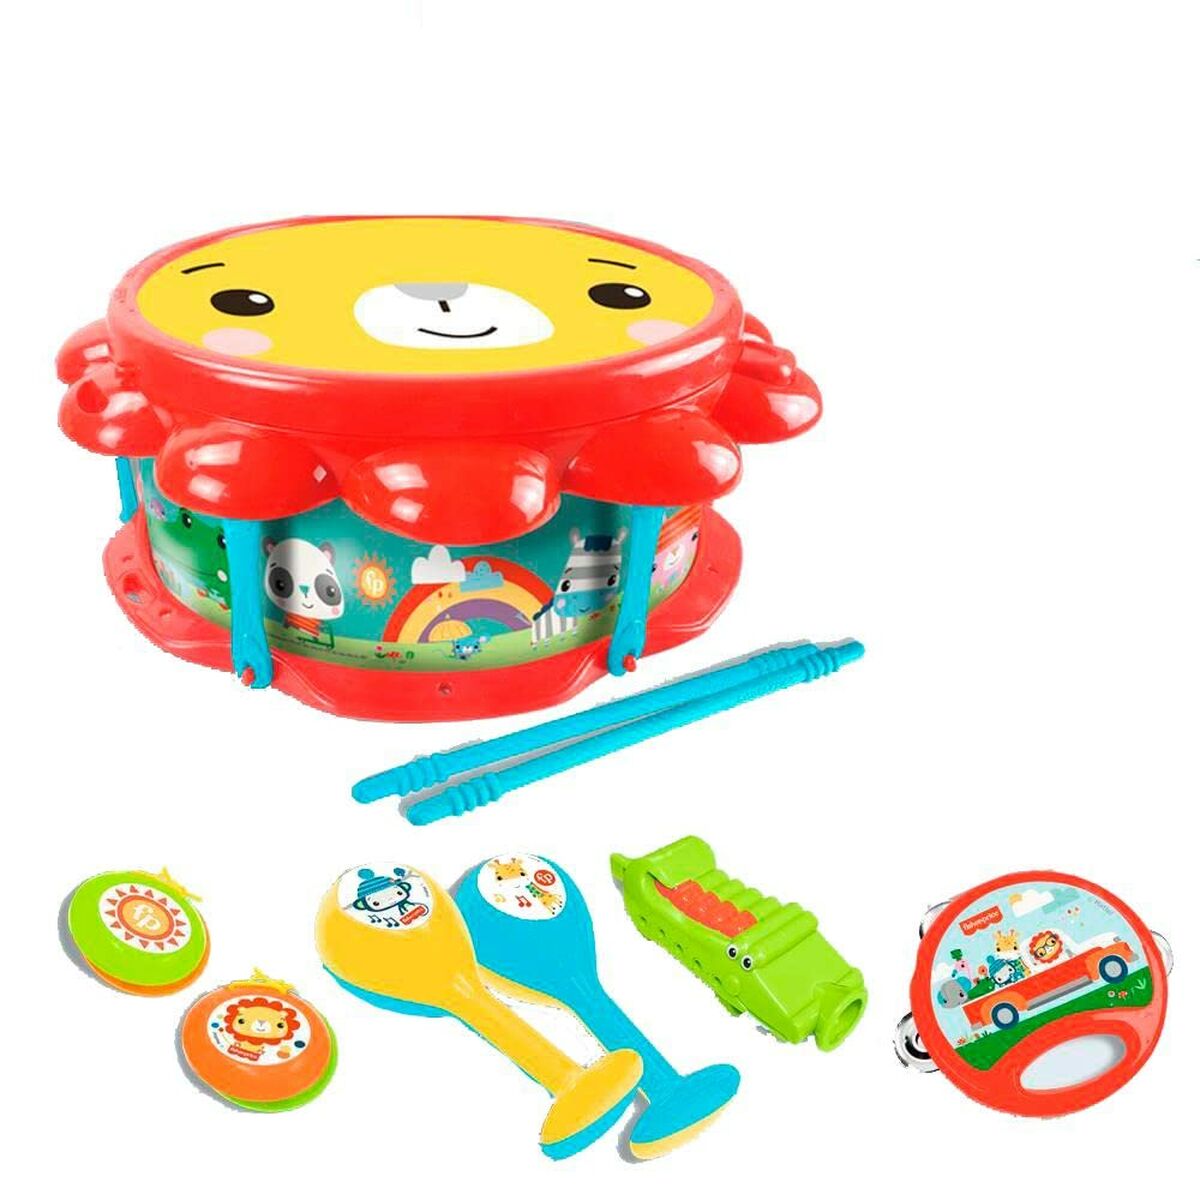 Ensemble musical Fisher Price animaux